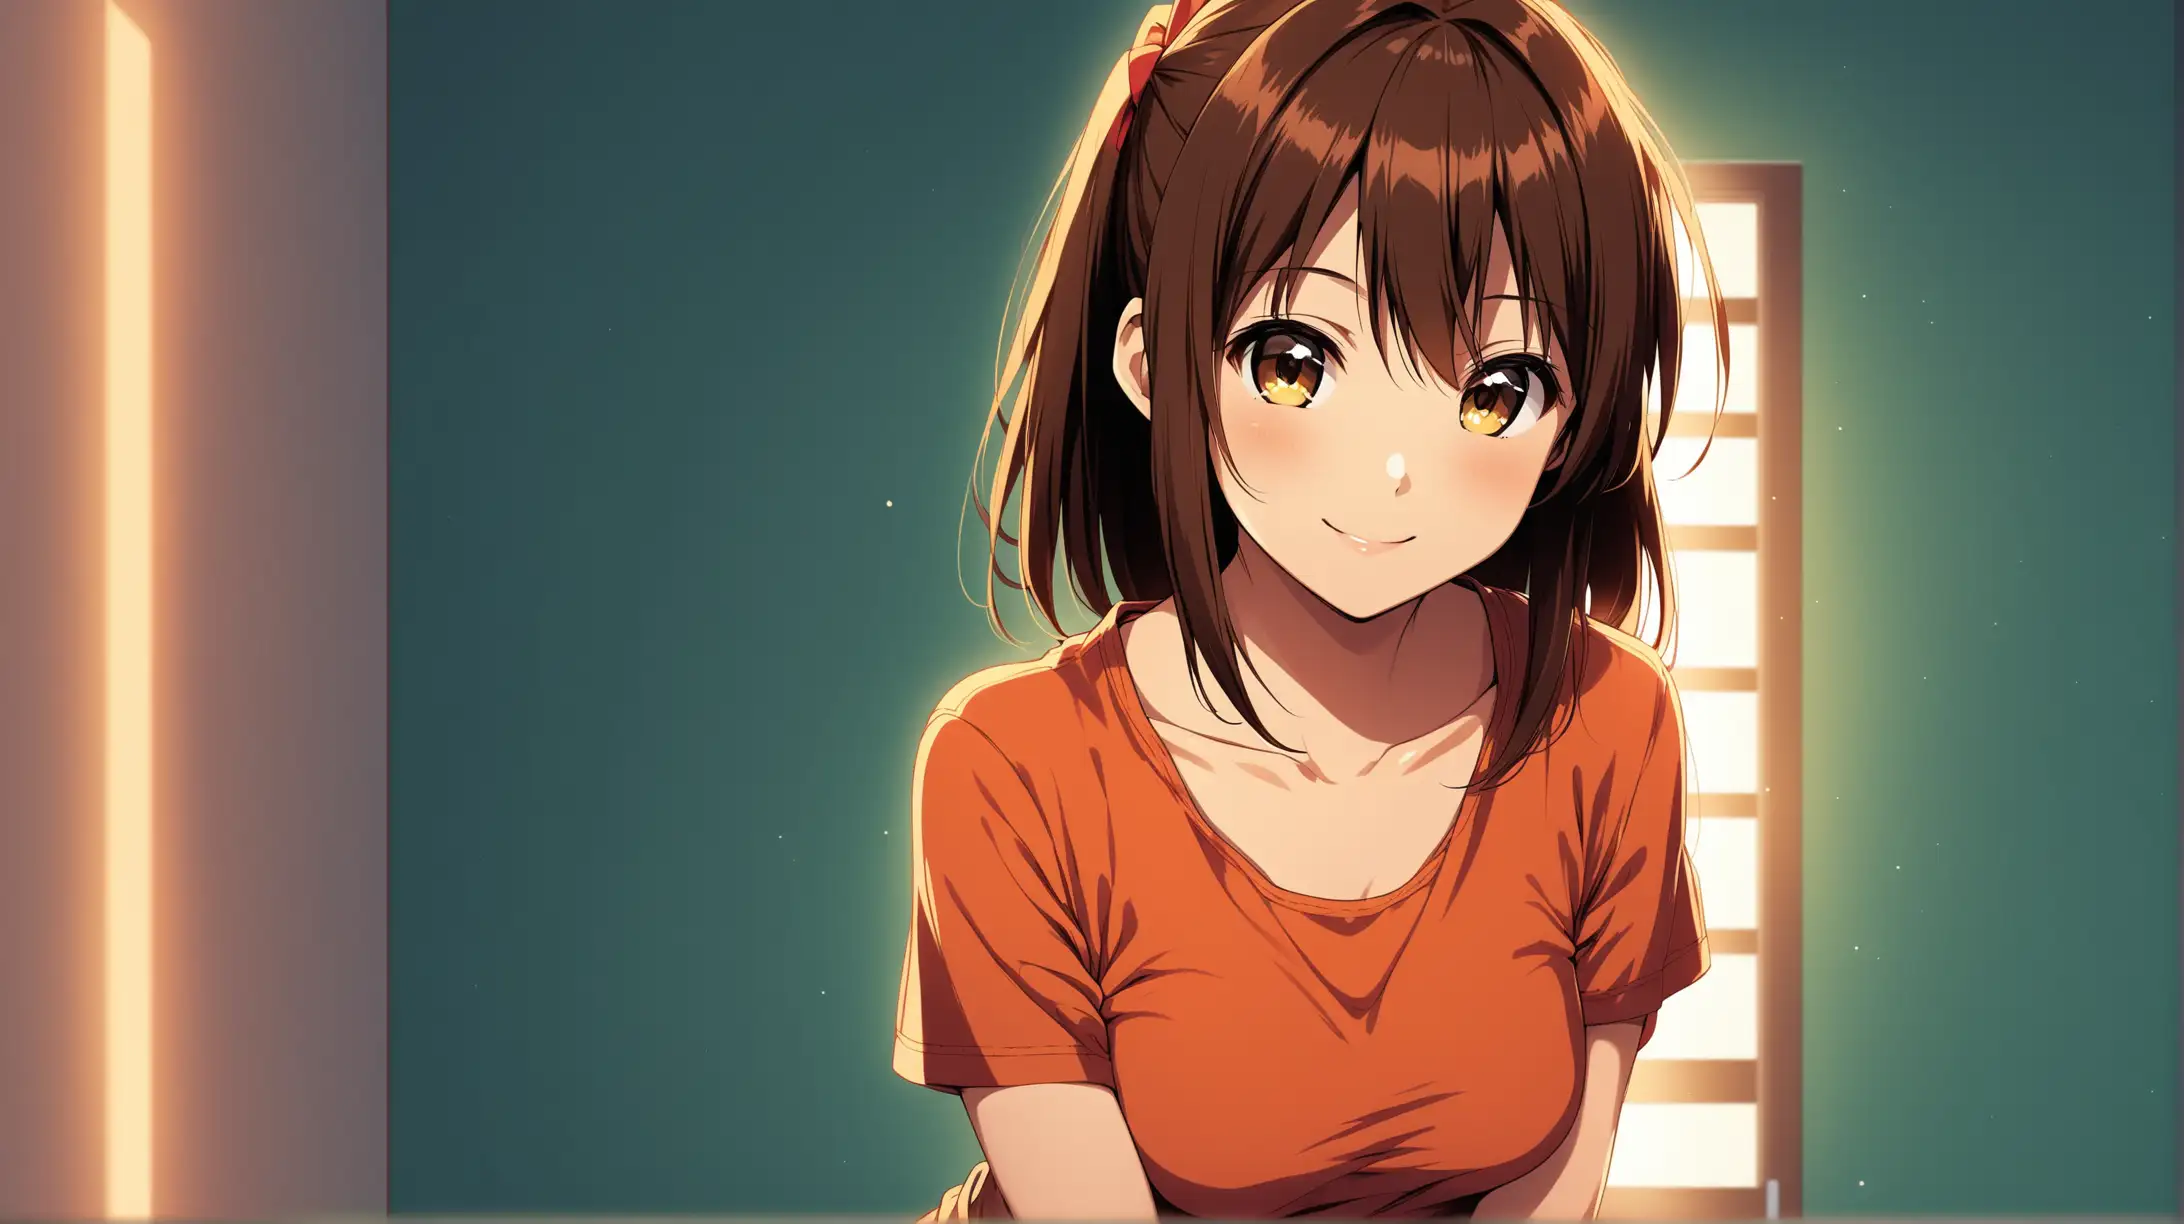 Draw the character Haruhi Suzumiya, high quality, ambient lighting, long shot, indoors, seductive pose, wearing a casual outfit, smiling at the viewer